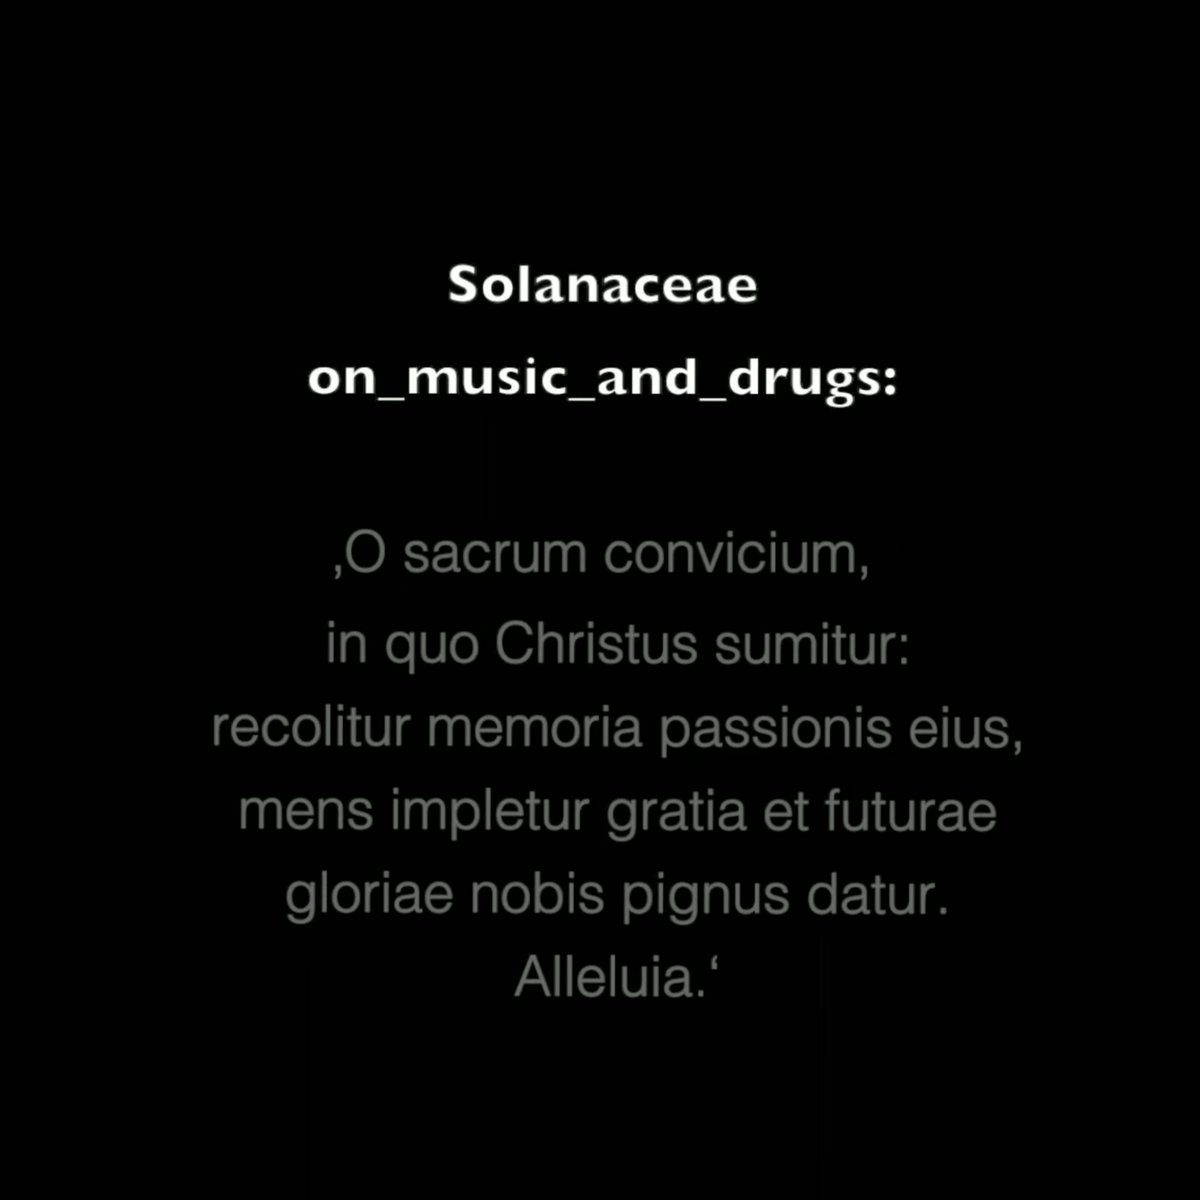 At the end of the video this rolled up. Solanaceae (Nightshade) is the name of their EP & a flowering plant. The text, also on their basecamp page, is the "O sacrum convivium" a Latin prose text that celebrate the Eucharistic celebrarion (not from the Bible)